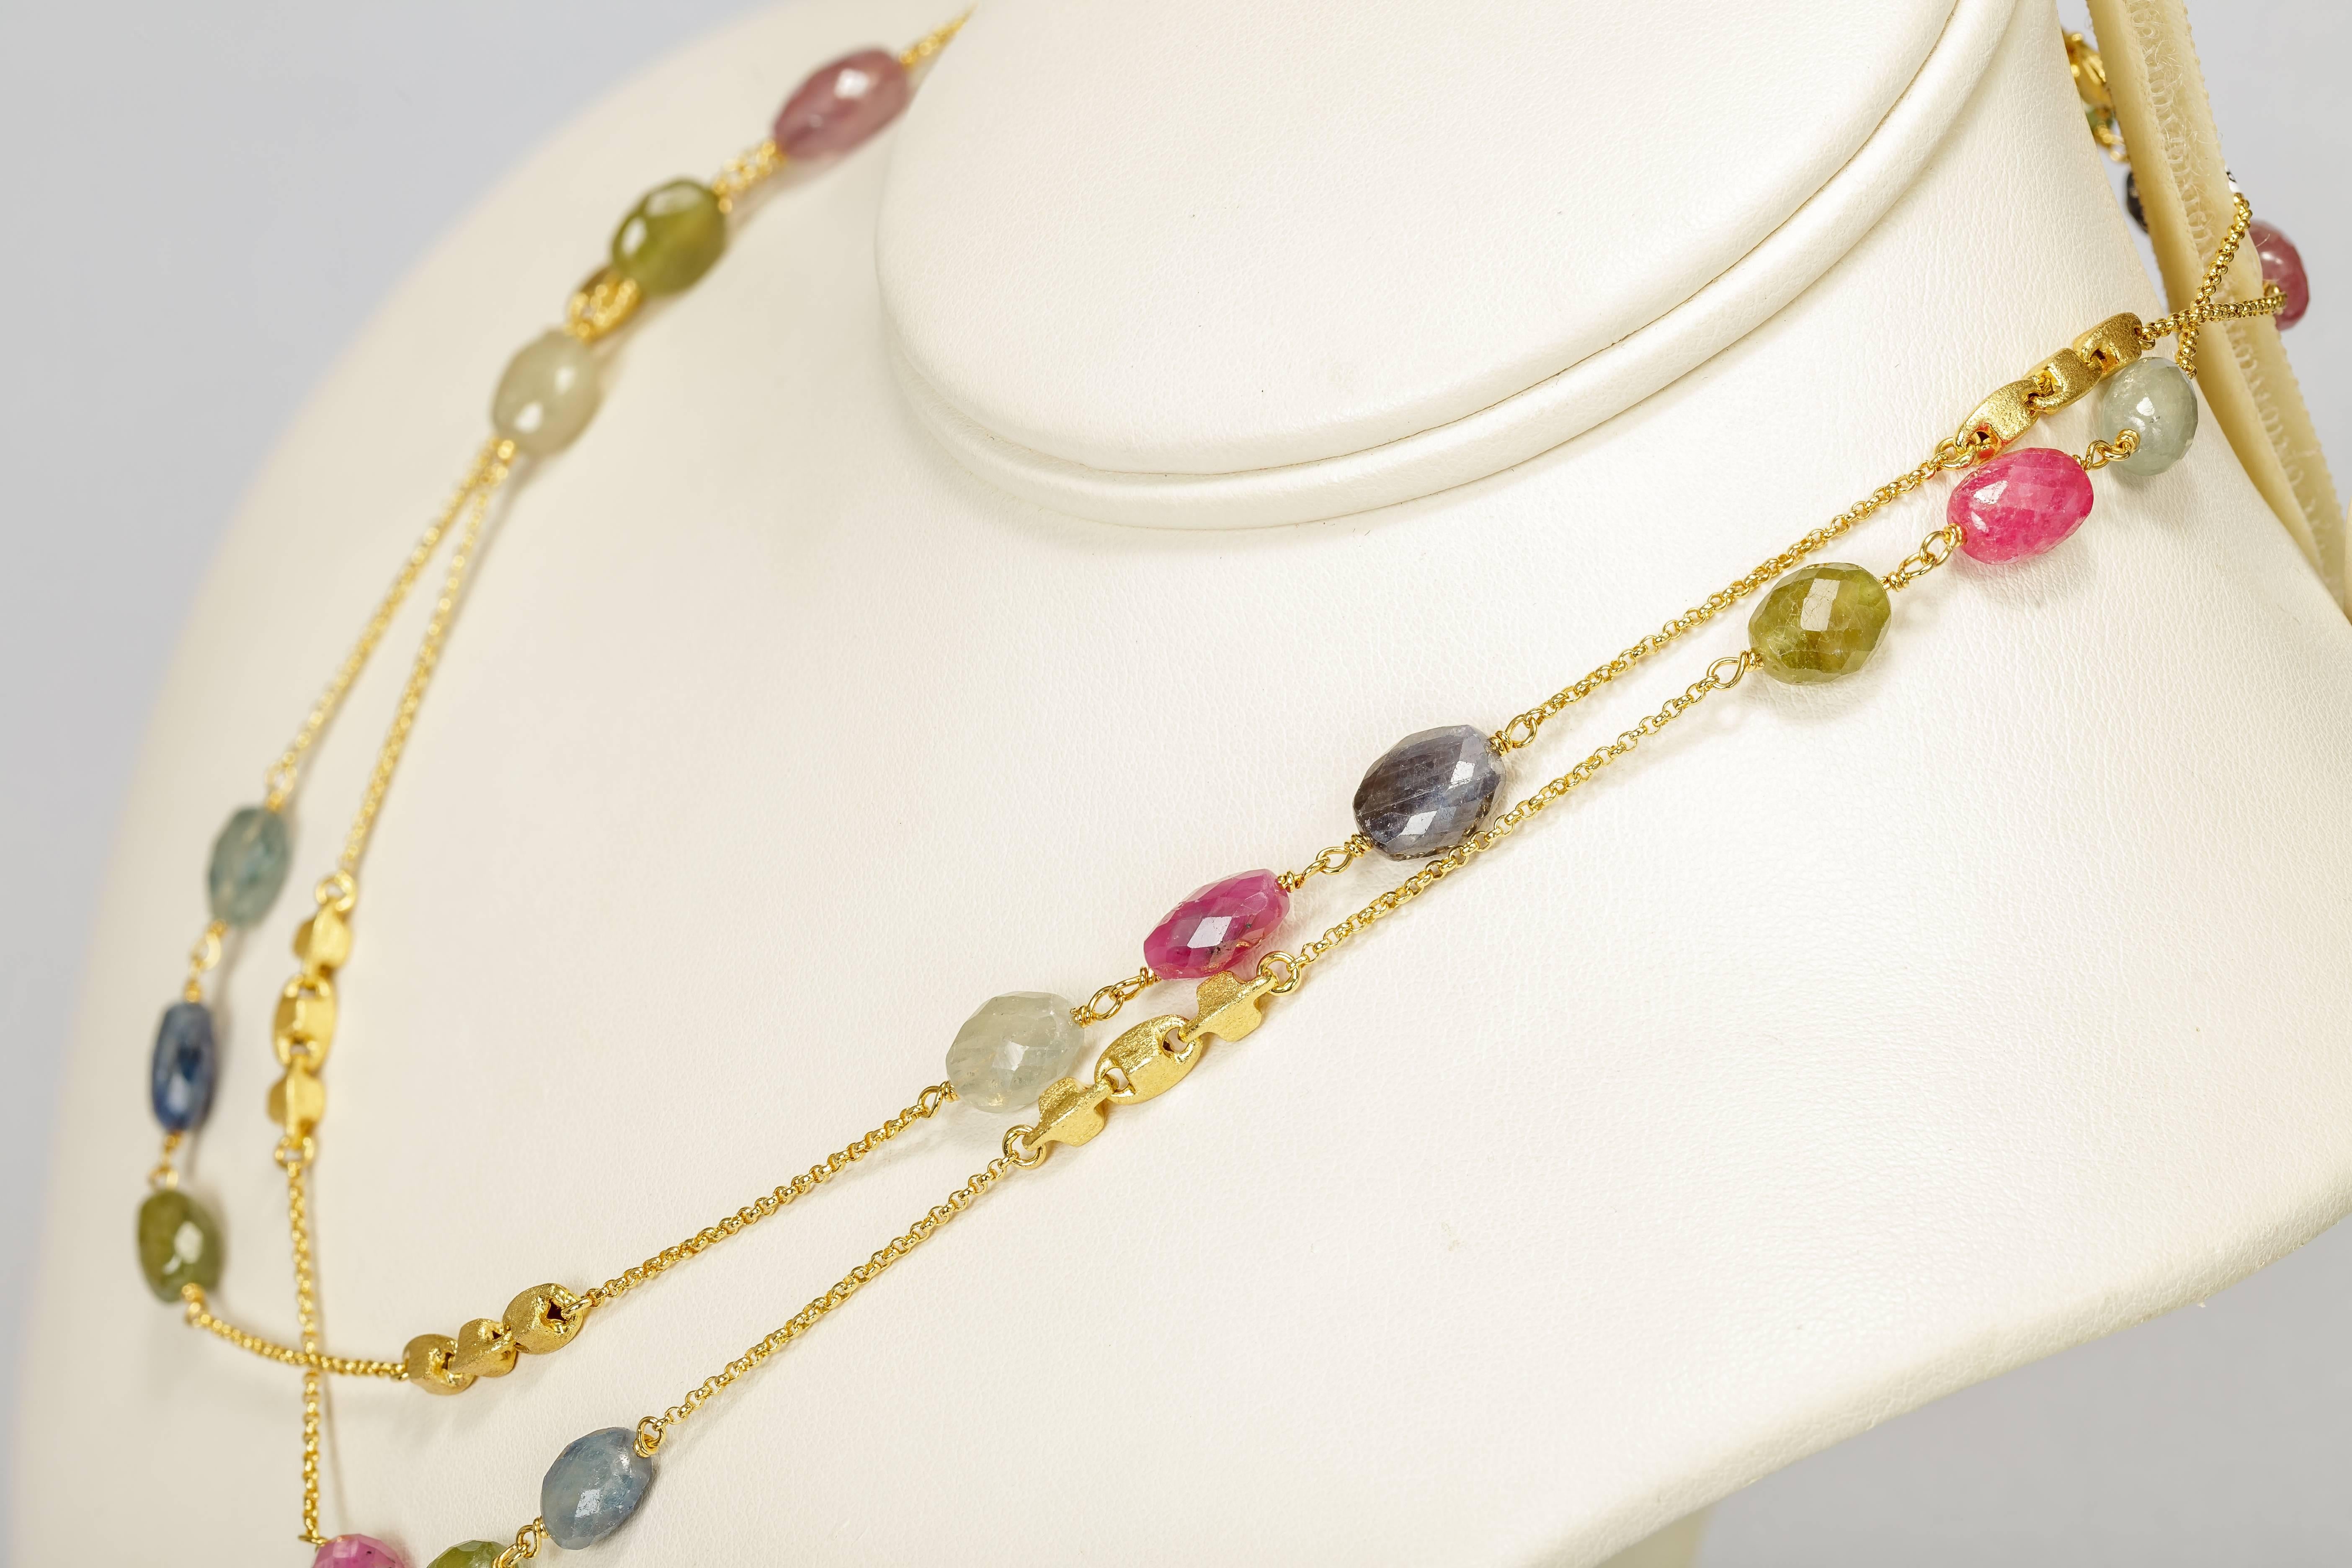 Yvel Colored Sapphire Bead Necklace 36 Inches 18 Karat Yellow Gold 106.00 Carat In New Condition For Sale In Houston, TX